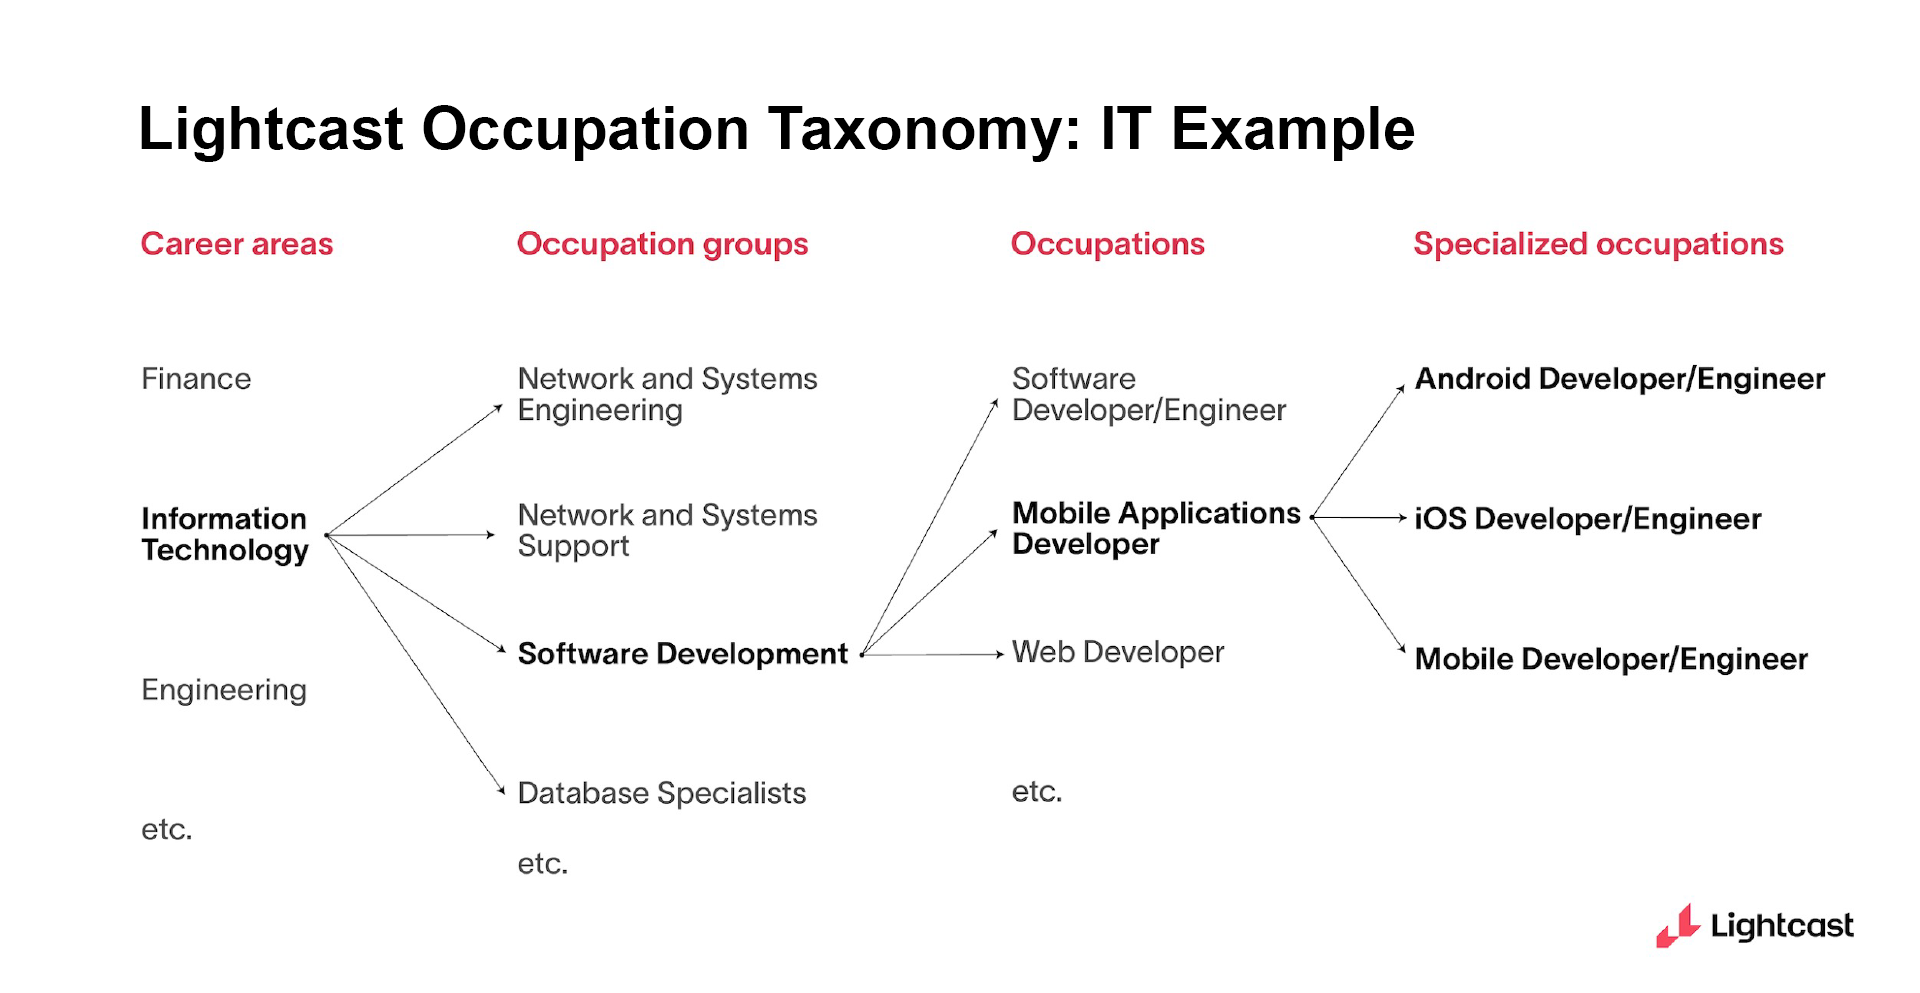 Lightcast Occupation Taxonomy example for IT, breaking down the four levels